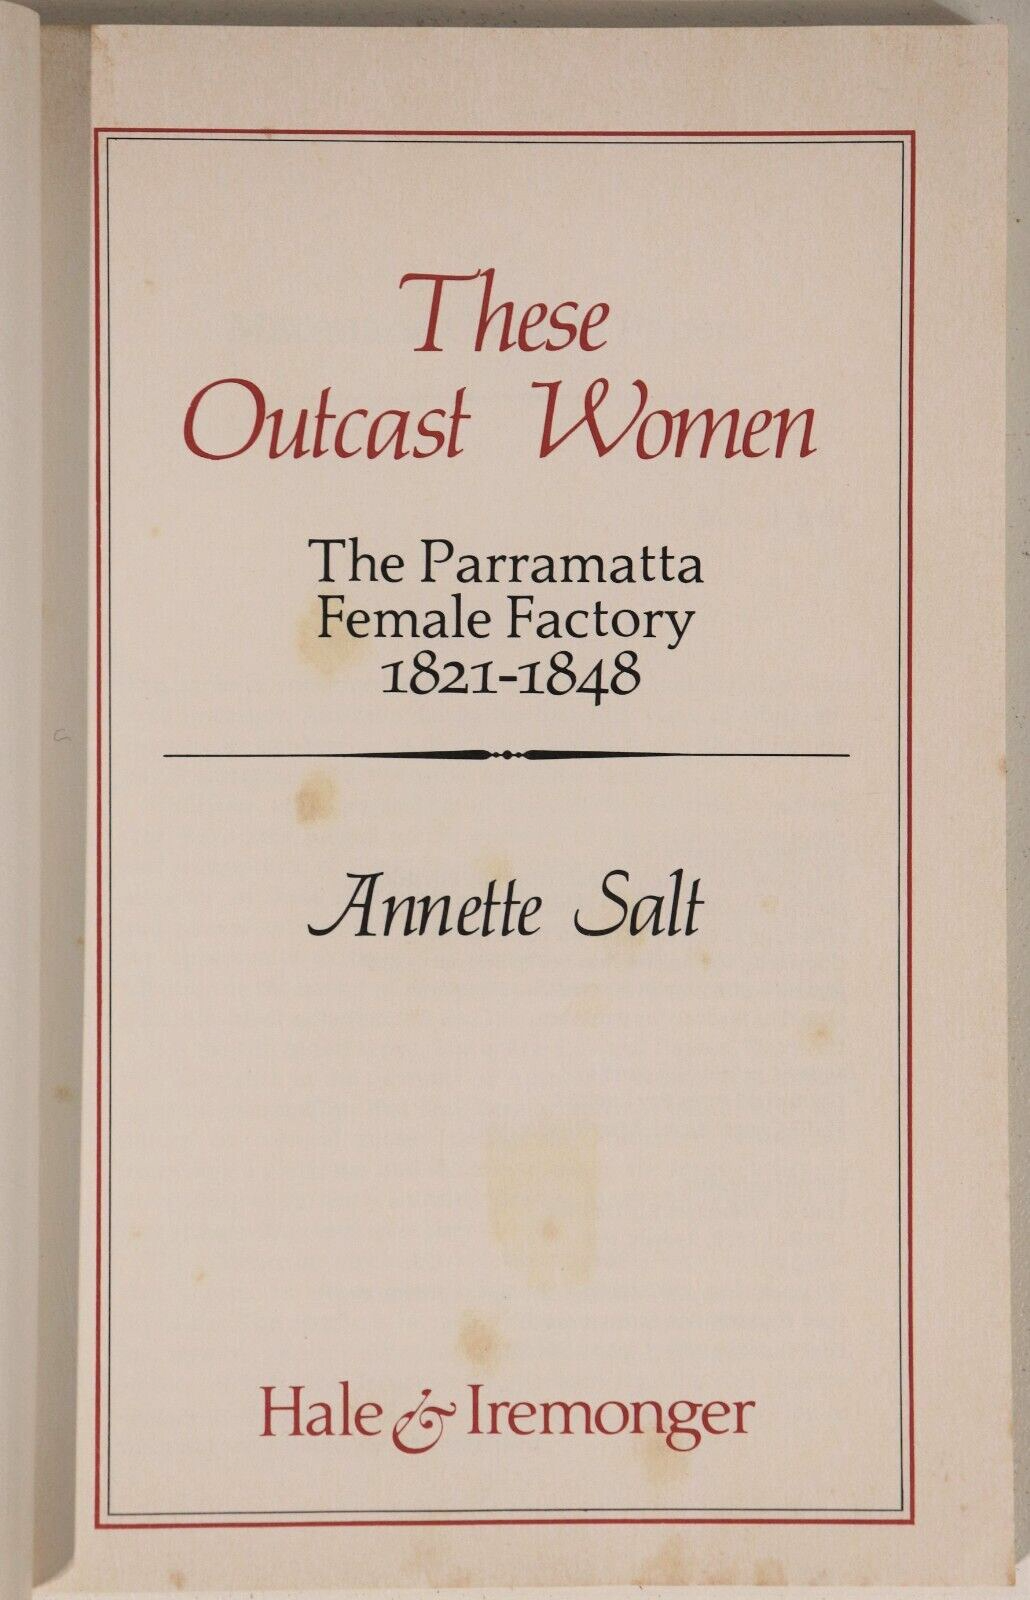 These Outcast Women by Annette Salt - 1984 - Australian Colonial History Book